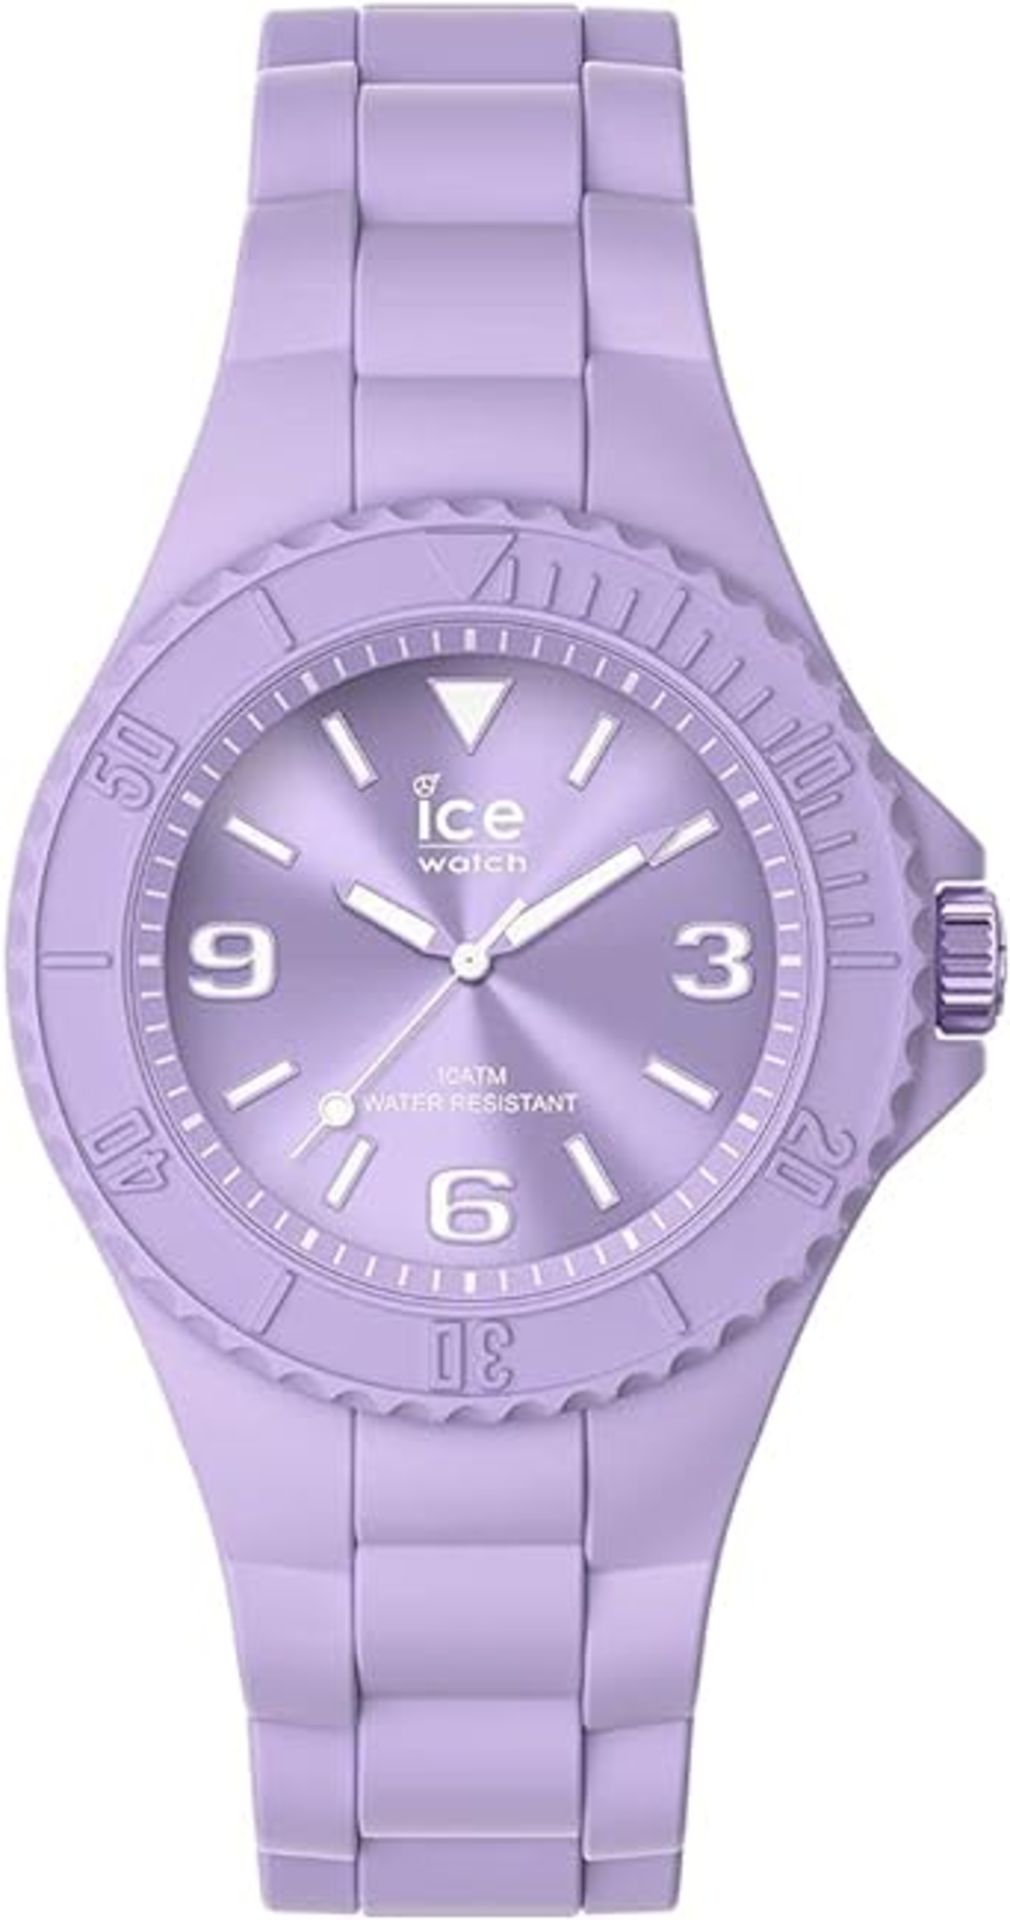 4x BRAND NEW ICE-WATCH Ice Generation Womans Watch. LILAC. RRP £55 EACH. (OFC147). Small 35 mm